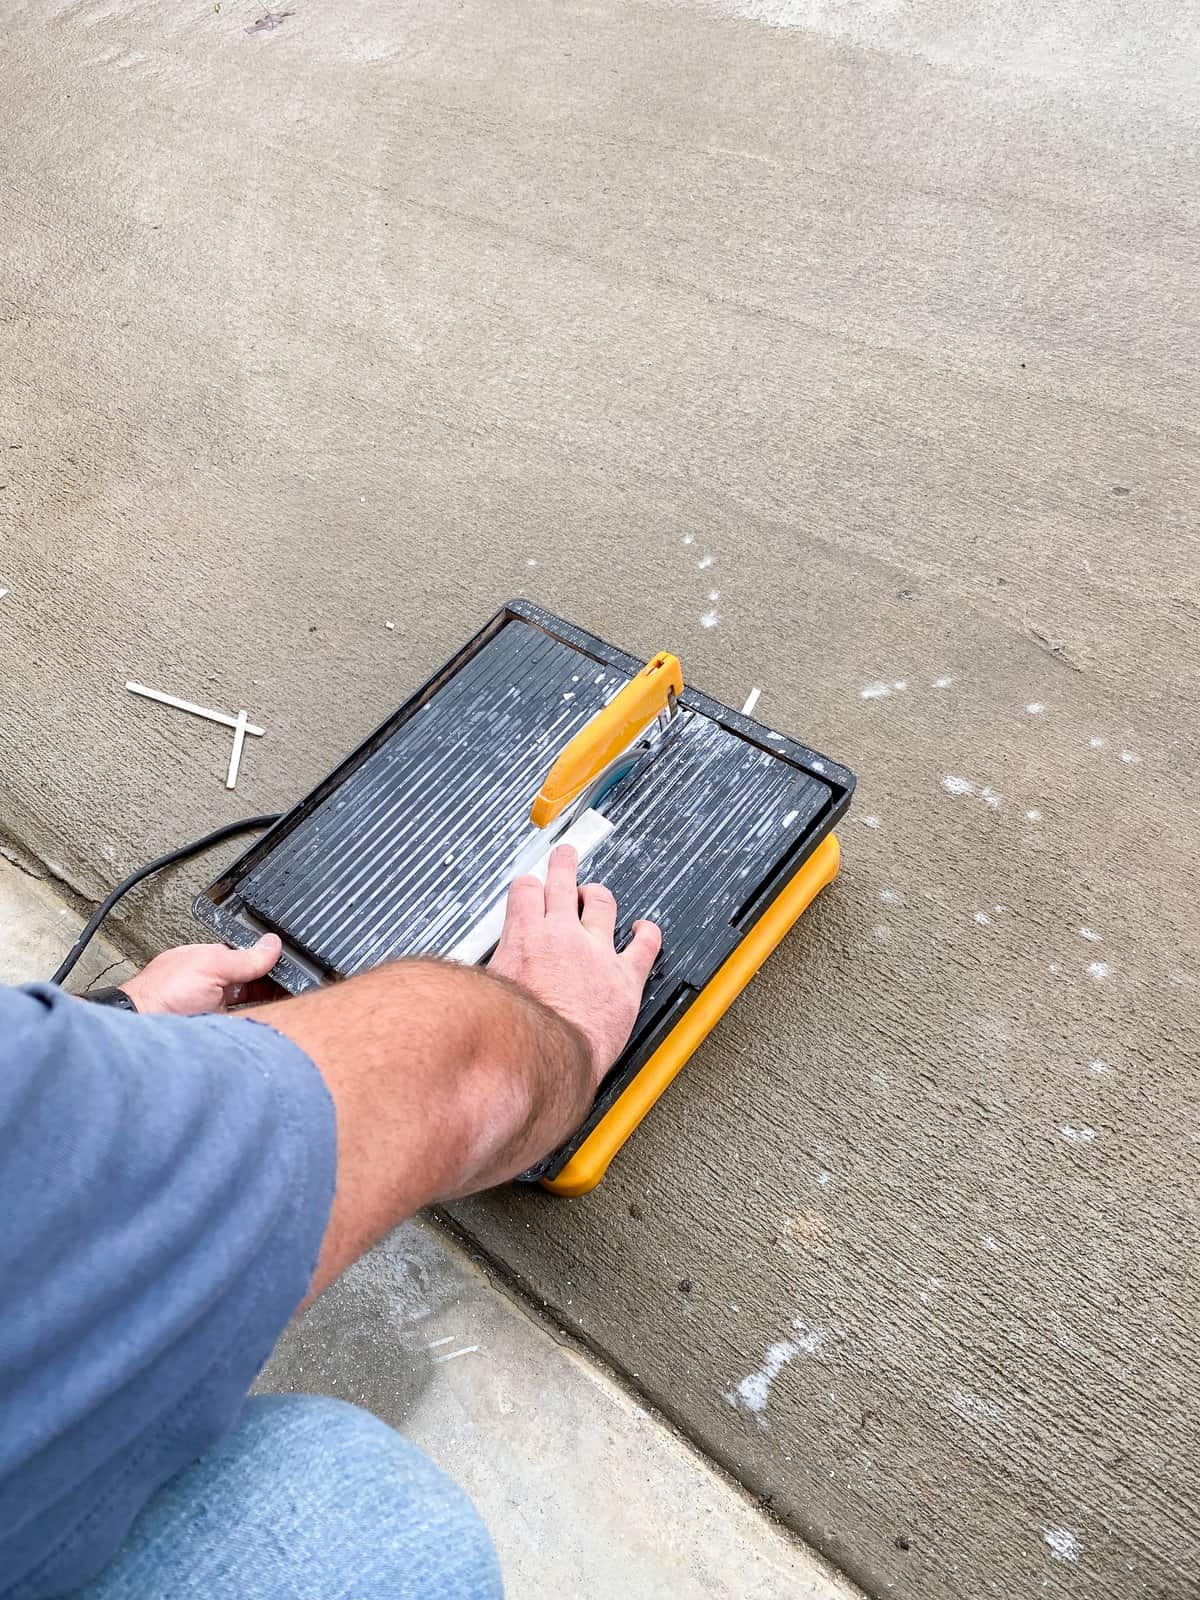 Cutting tile down to size